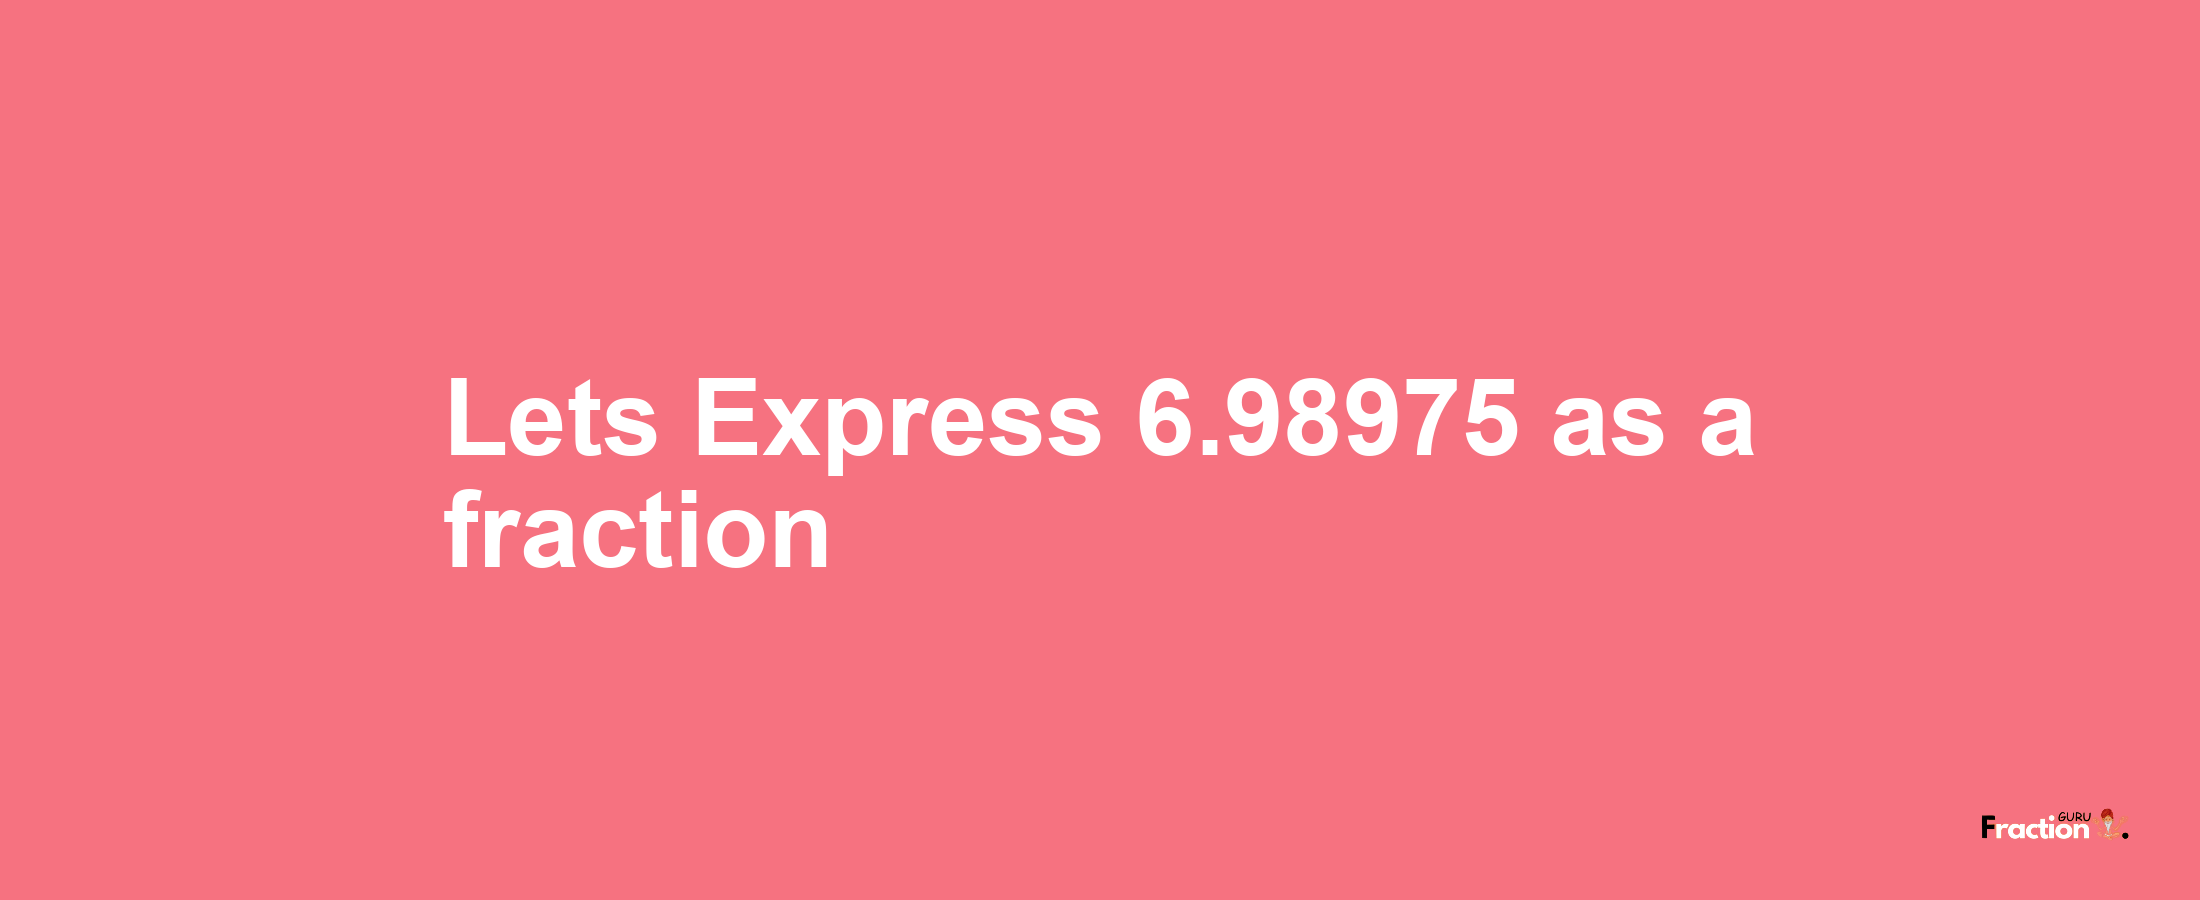 Lets Express 6.98975 as afraction